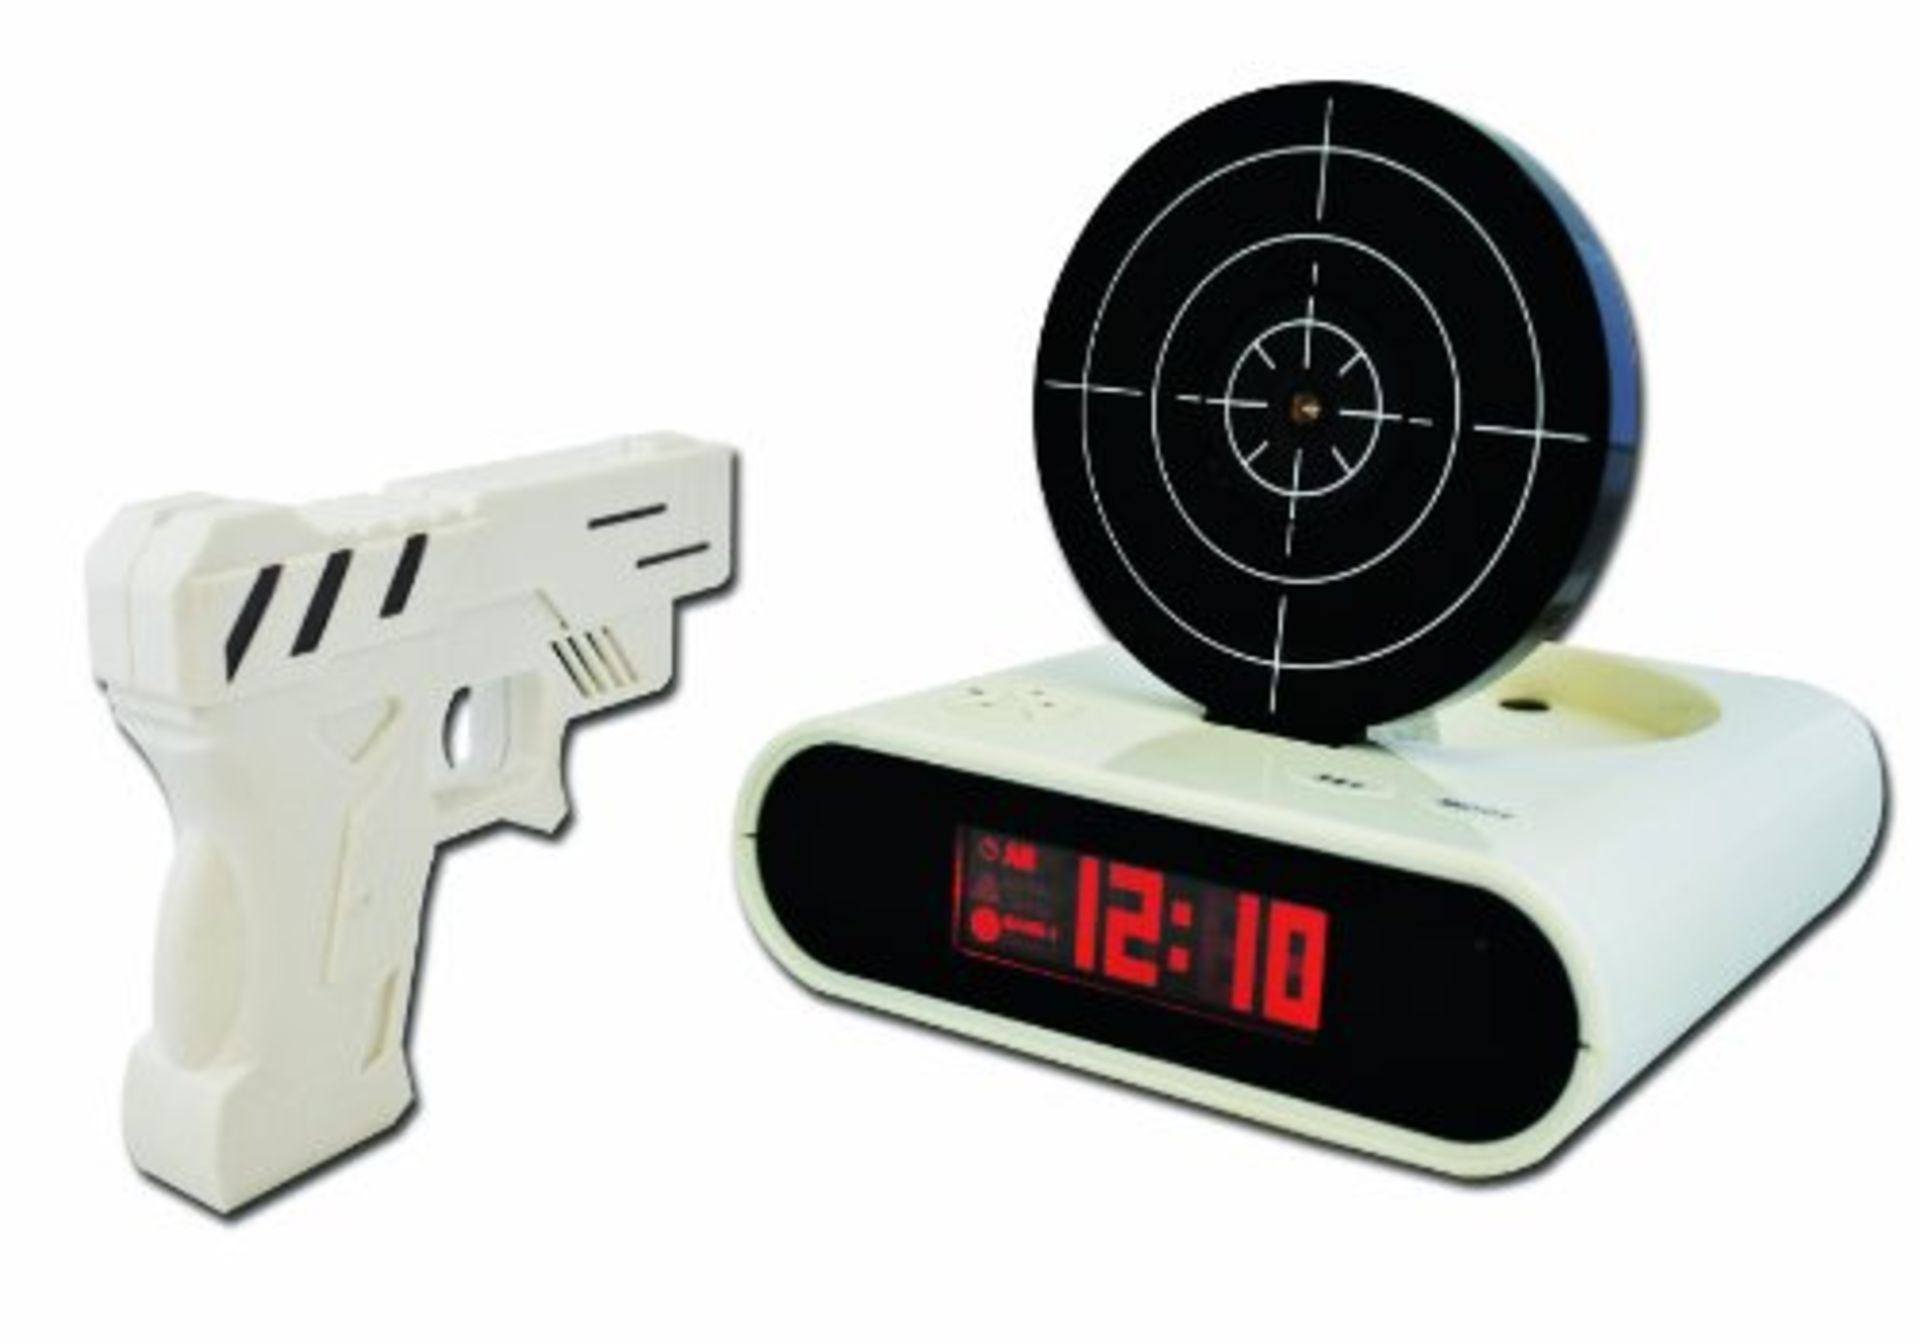 V Grade A Target practice alarm clock complete with electronic gun X  2  Bid price to be